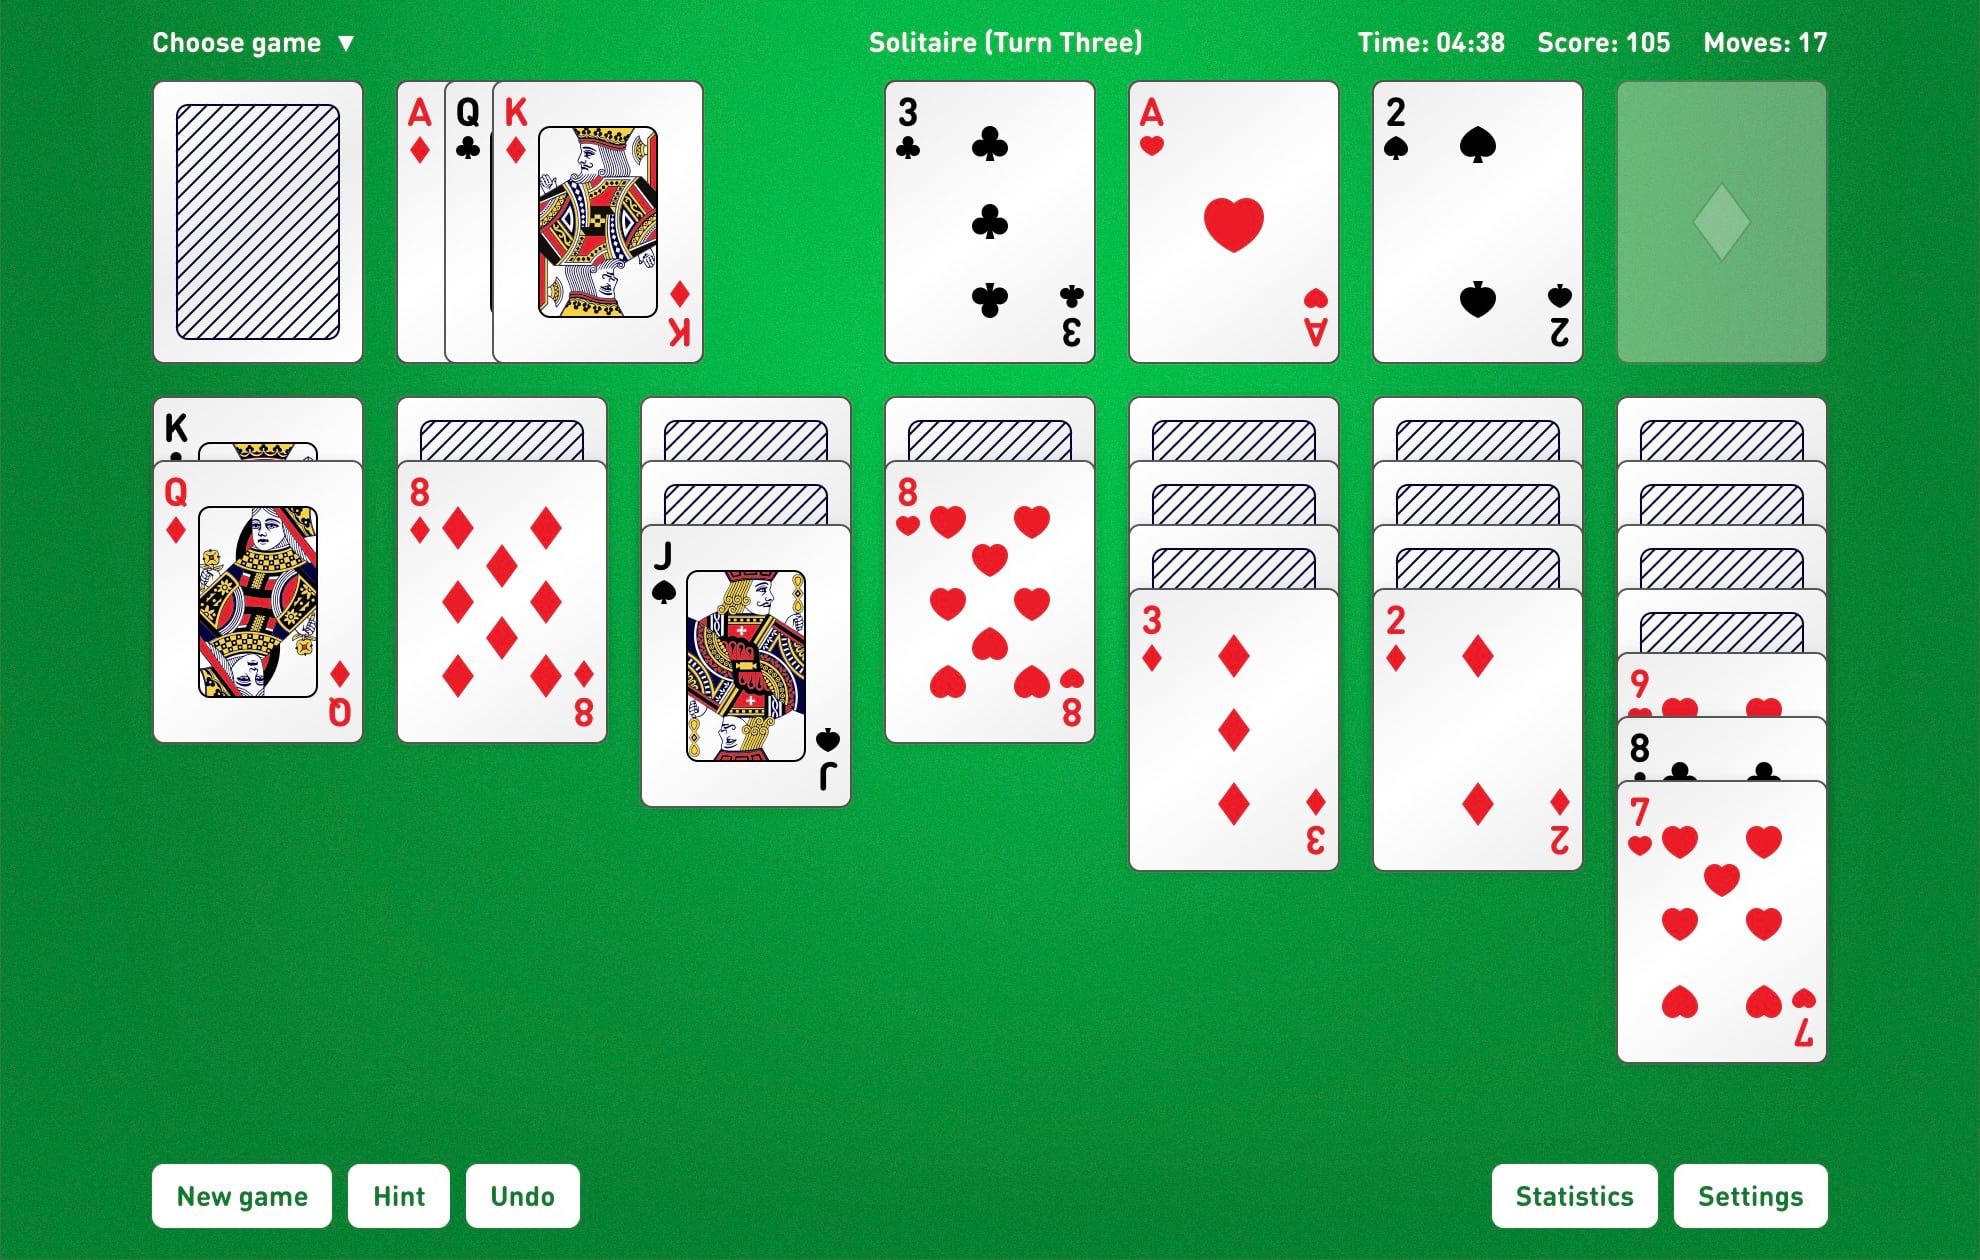 Free solitaire download no ads for windows 10